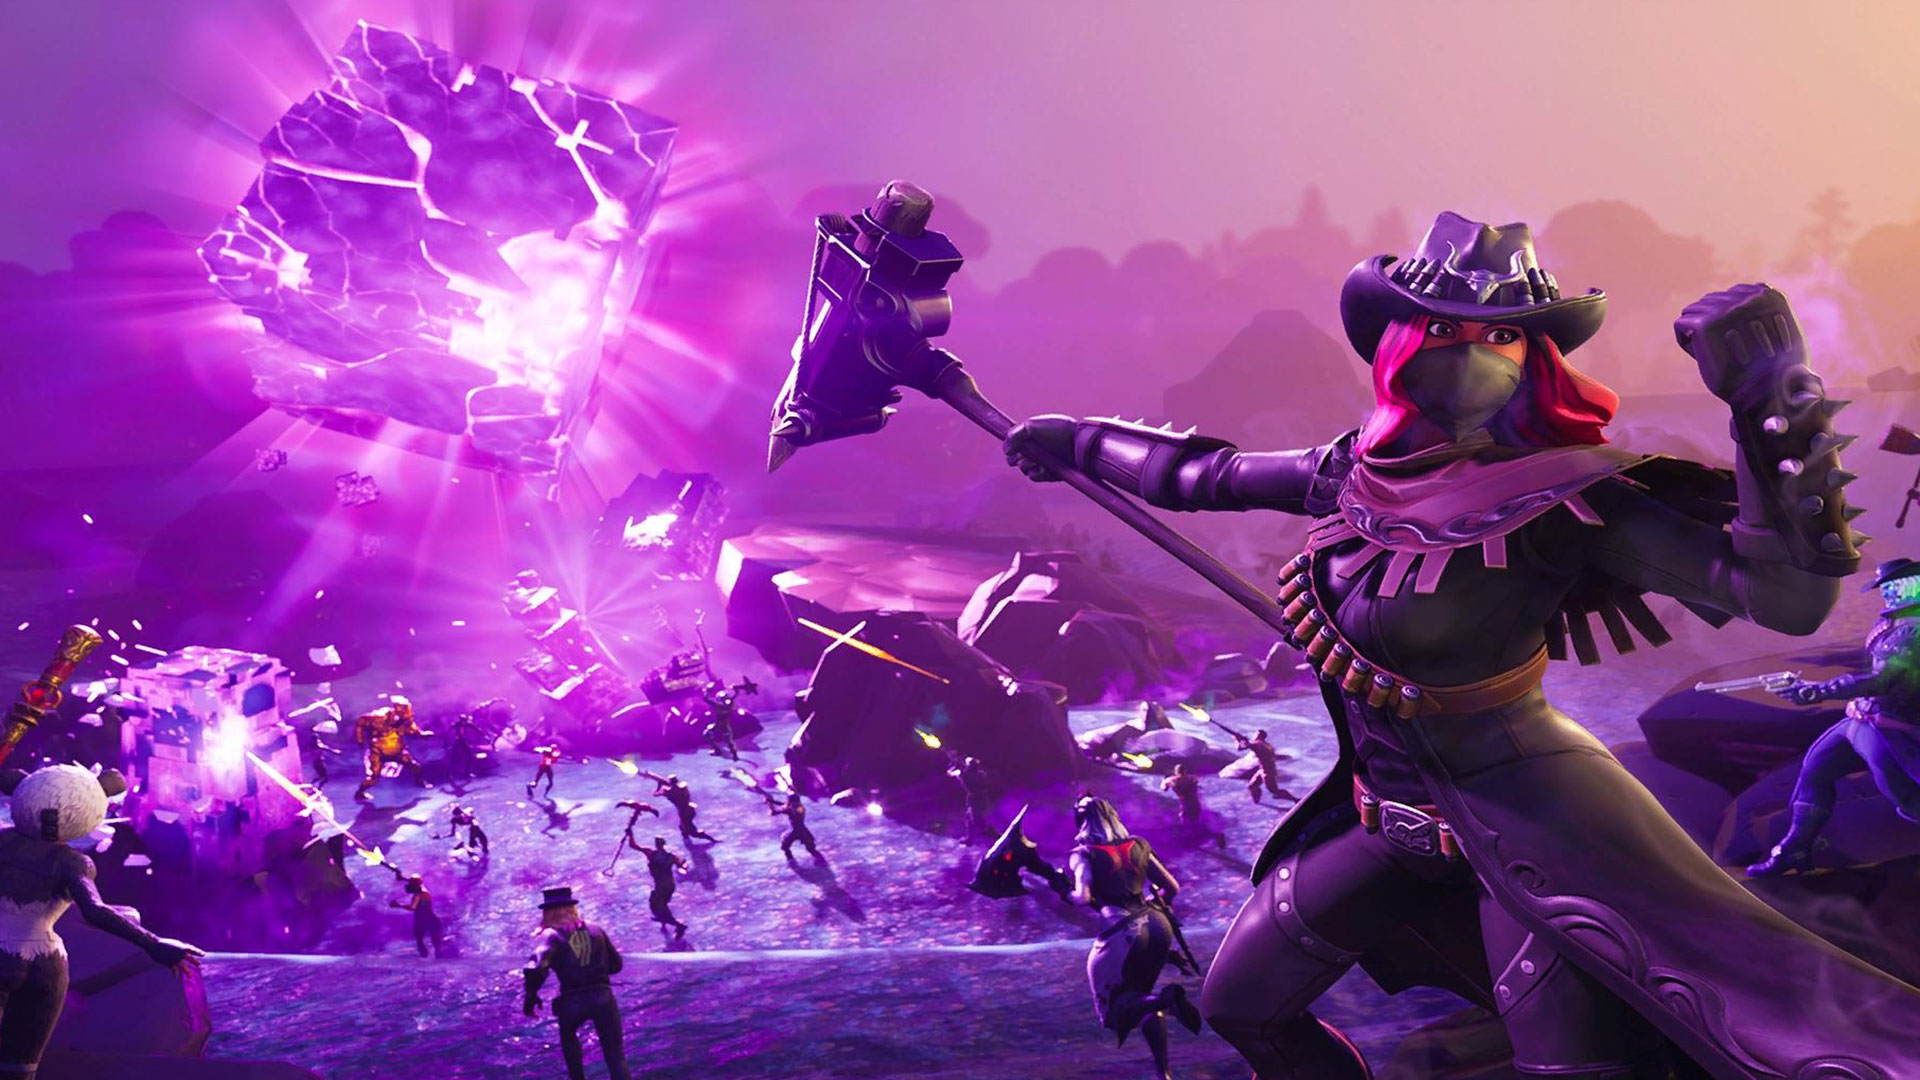 Fortnite on Xbox One gets mouse and keyboard support Wednesday - CNET